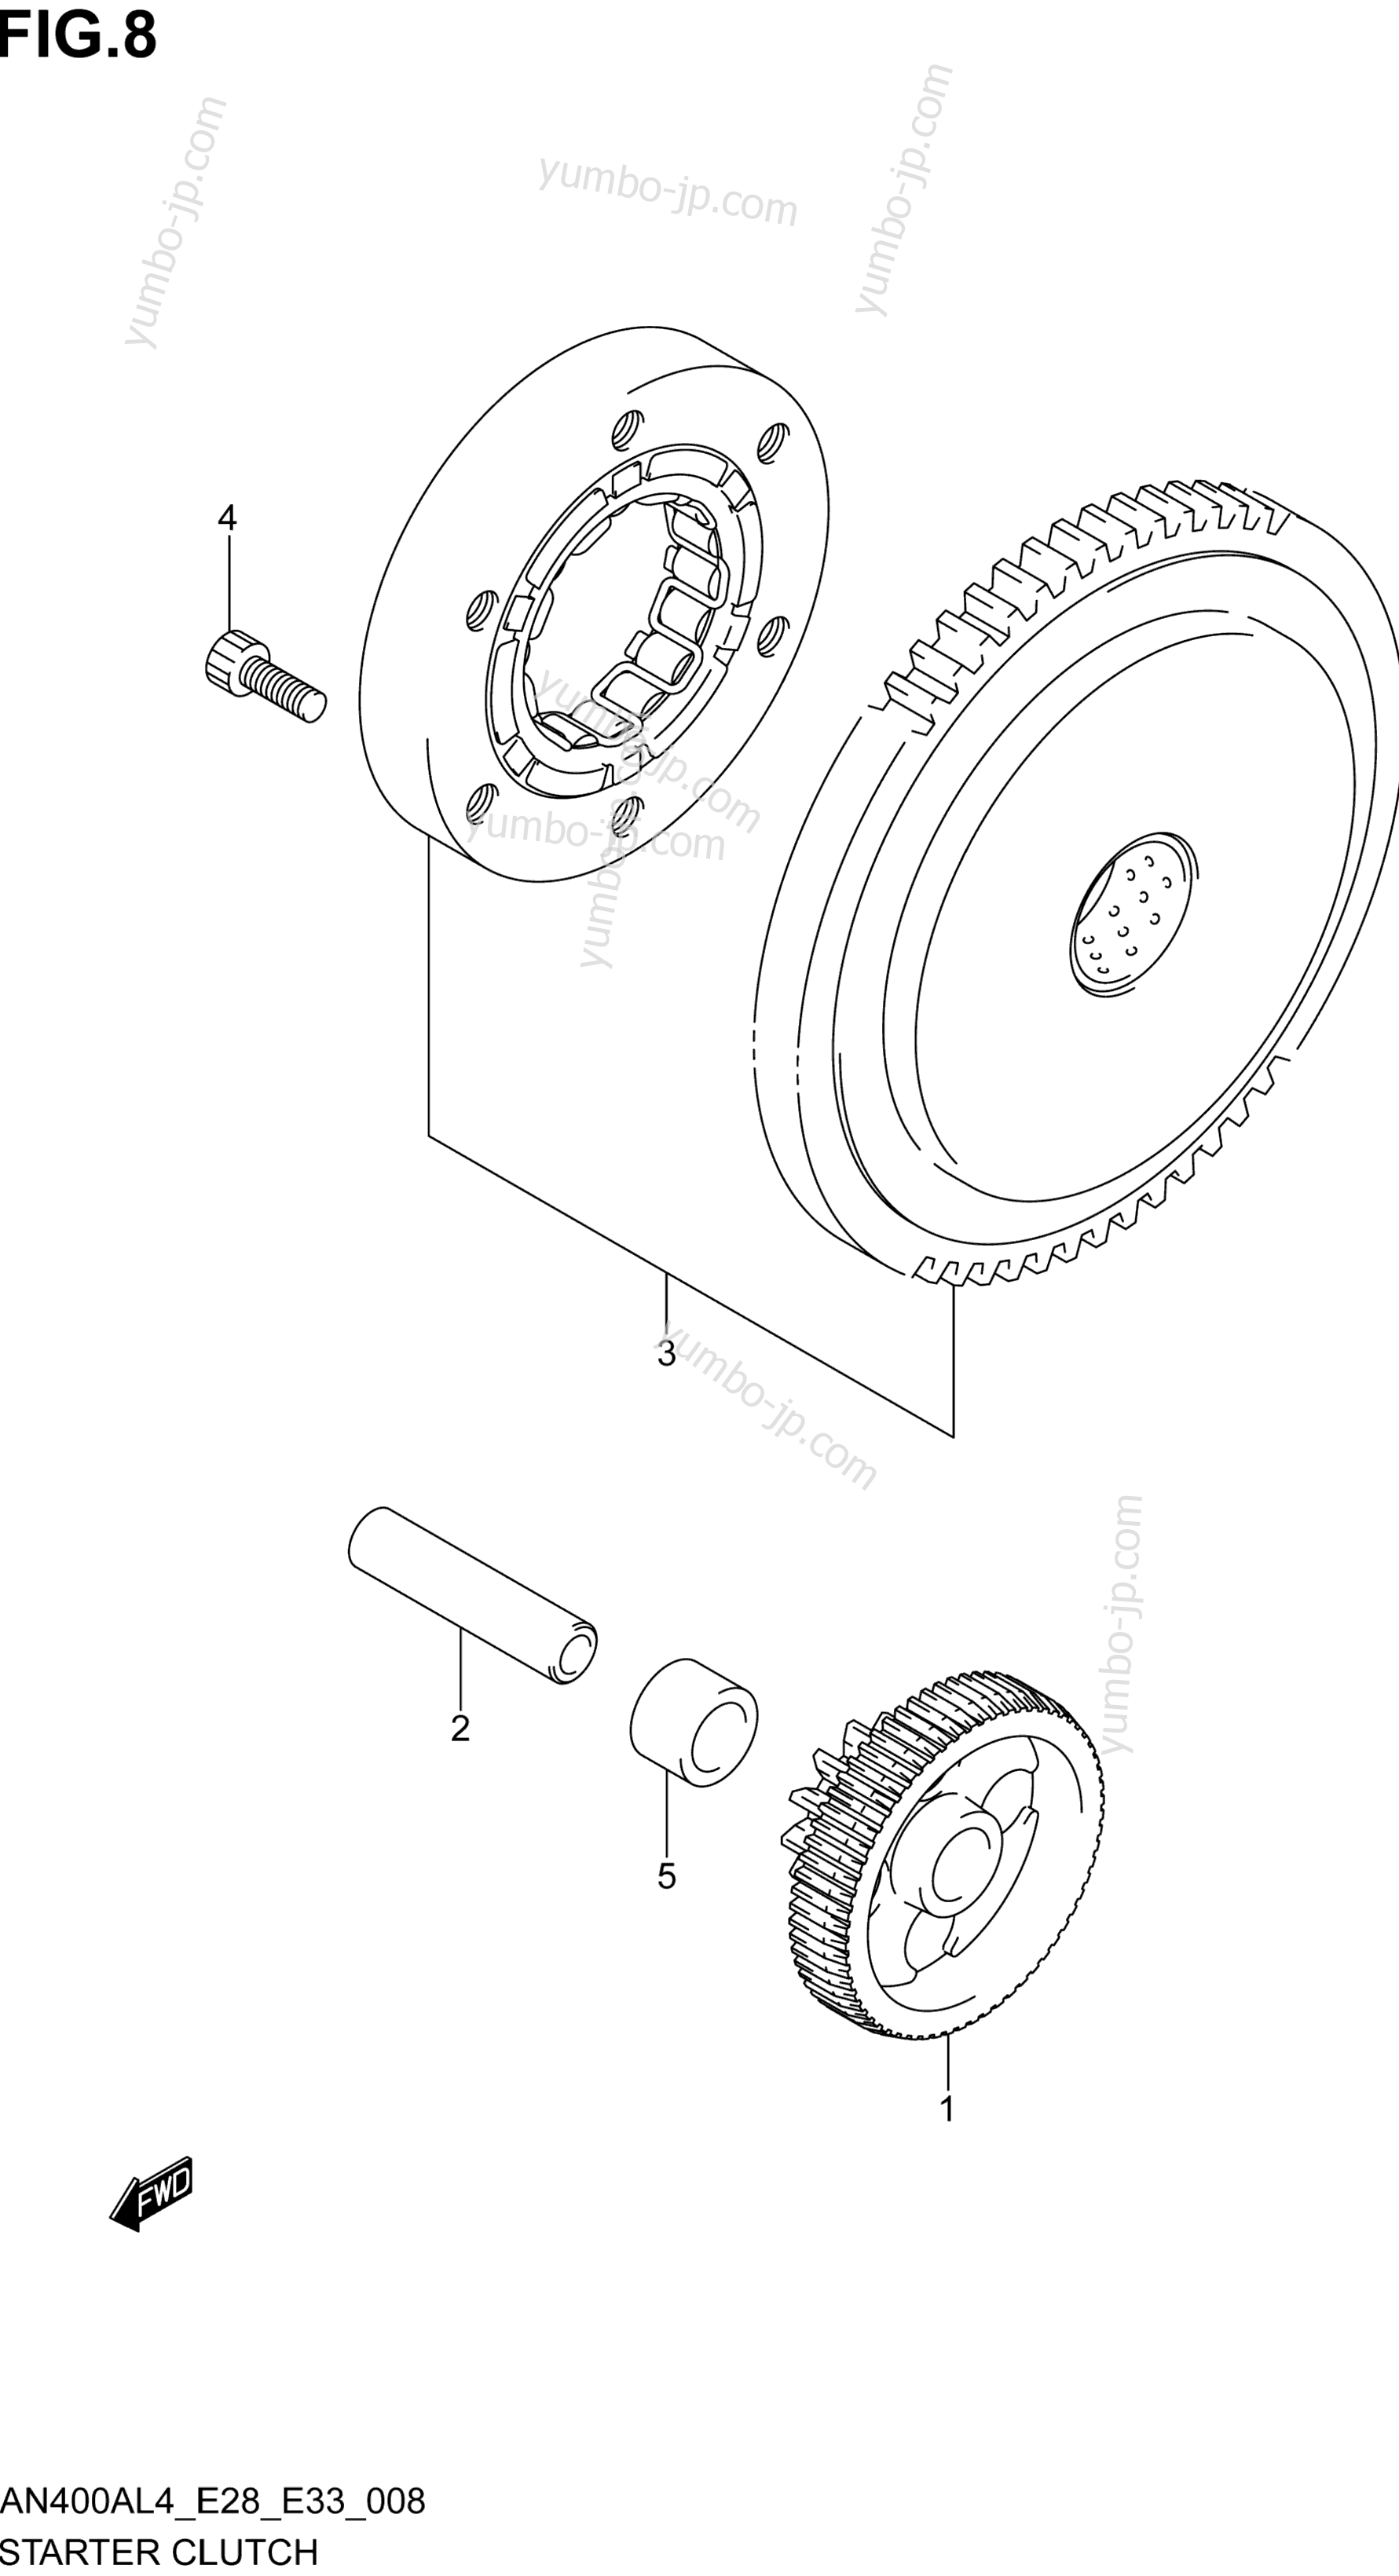 STARTER CLUTCH for scooters SUZUKI AN400A 2014 year